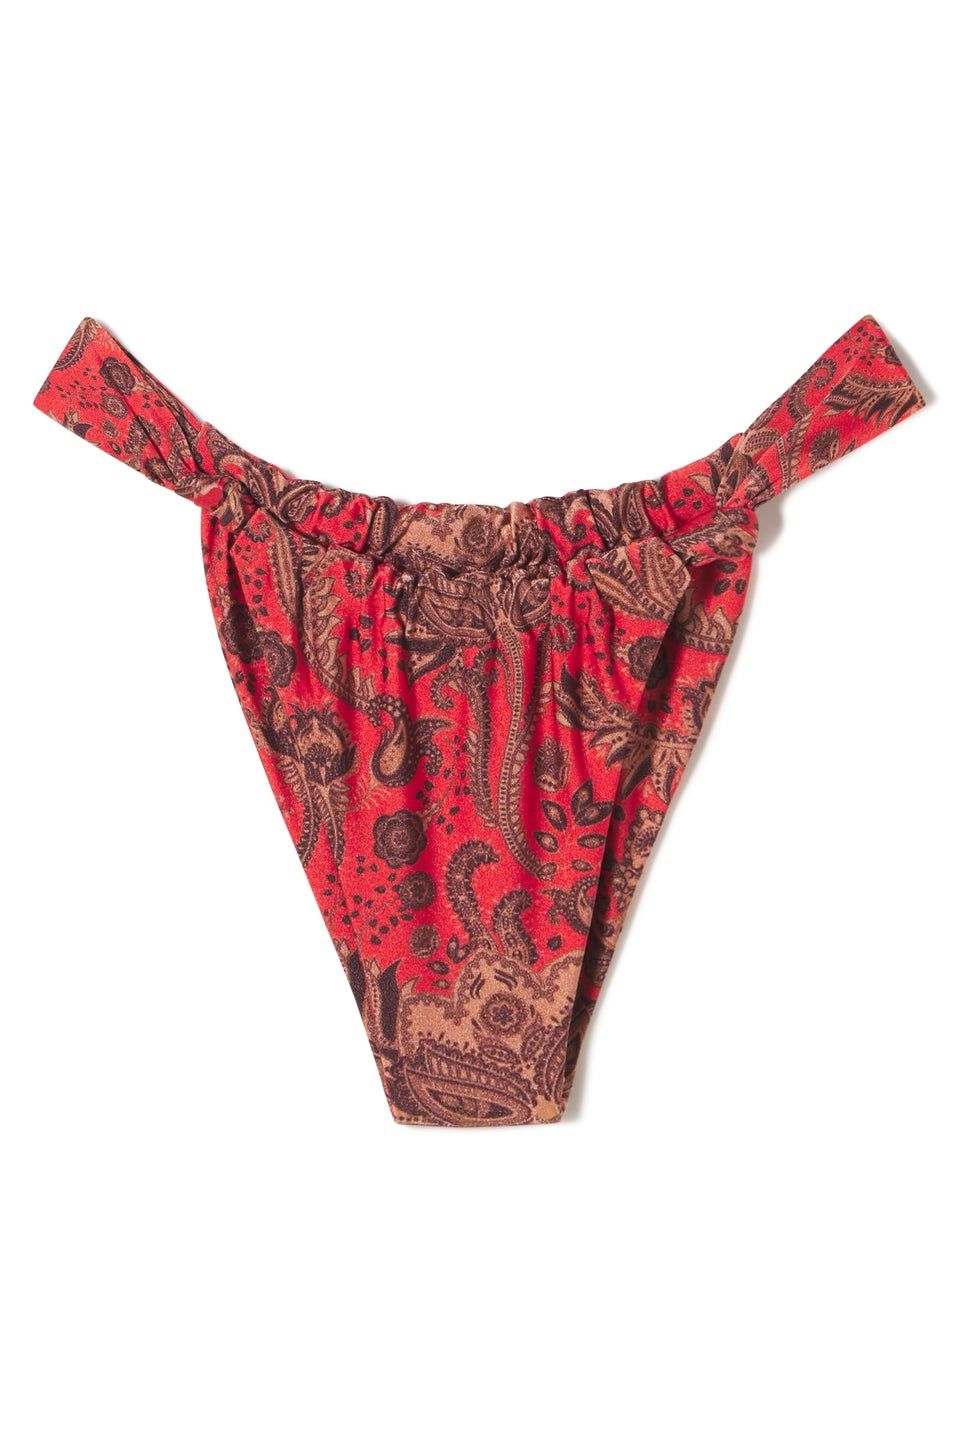 https://hips.hearstapps.com/vader-prod.s3.amazonaws.com/1683727191-HILLCREST_BOTTOM_RED_PAiSLEY_FRONT.jpg?crop=0.667xw:1xh;center,top&resize=980:*